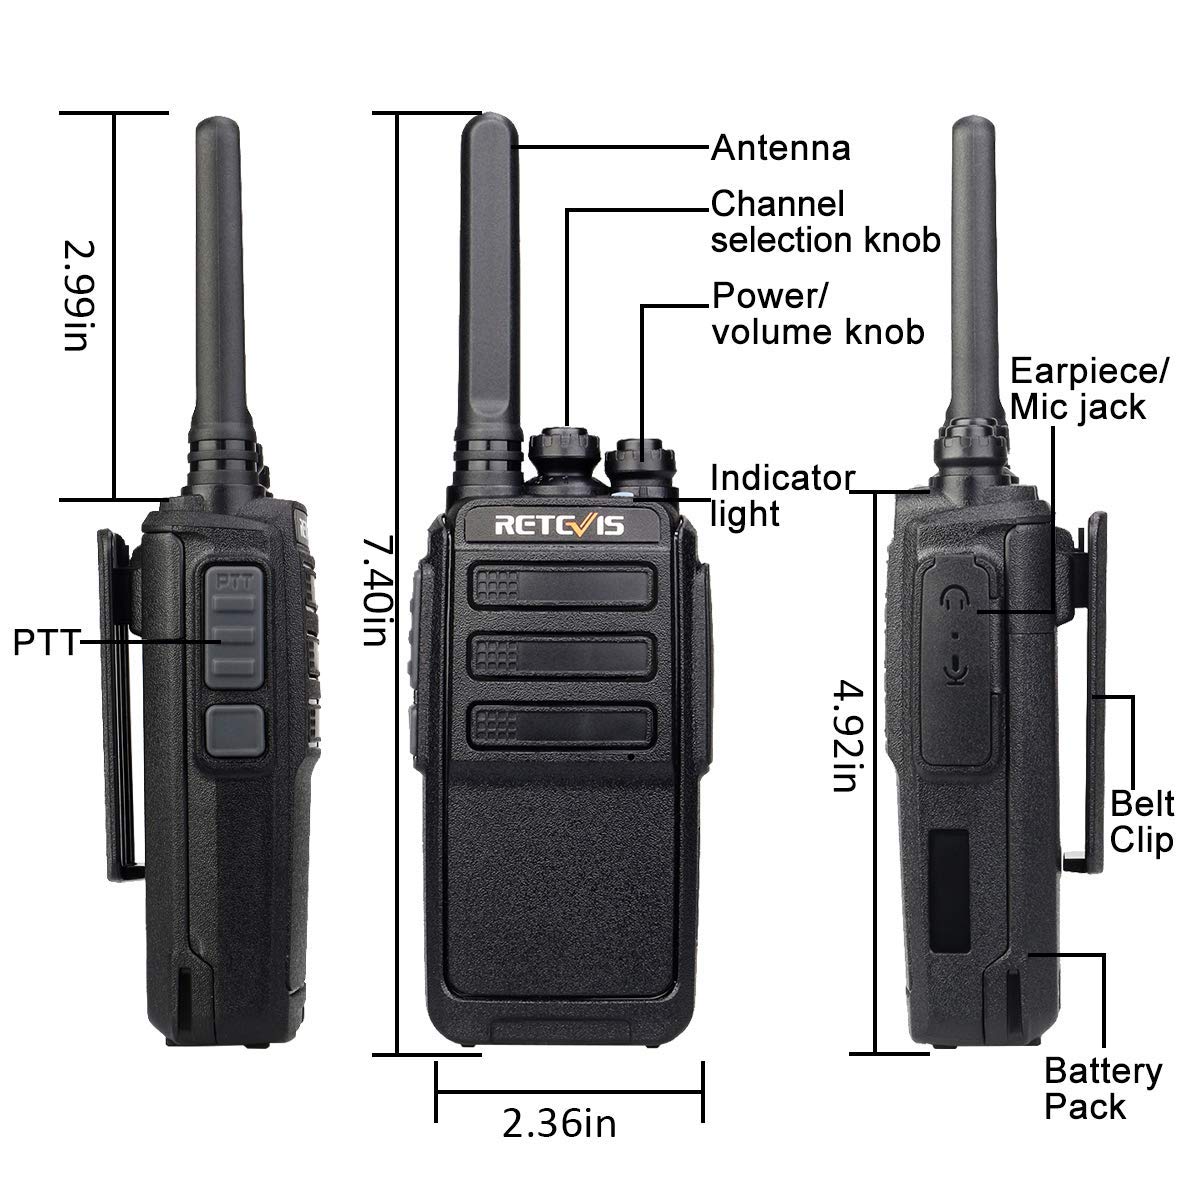 Retevis RT28 Walkie Talkies Long Range Rechargeable,2 Way Radios,Two Way Radios with Charger,VOX Squelch Emergency Alarm,Adults Police Security Company Warehouse (20 Pack)